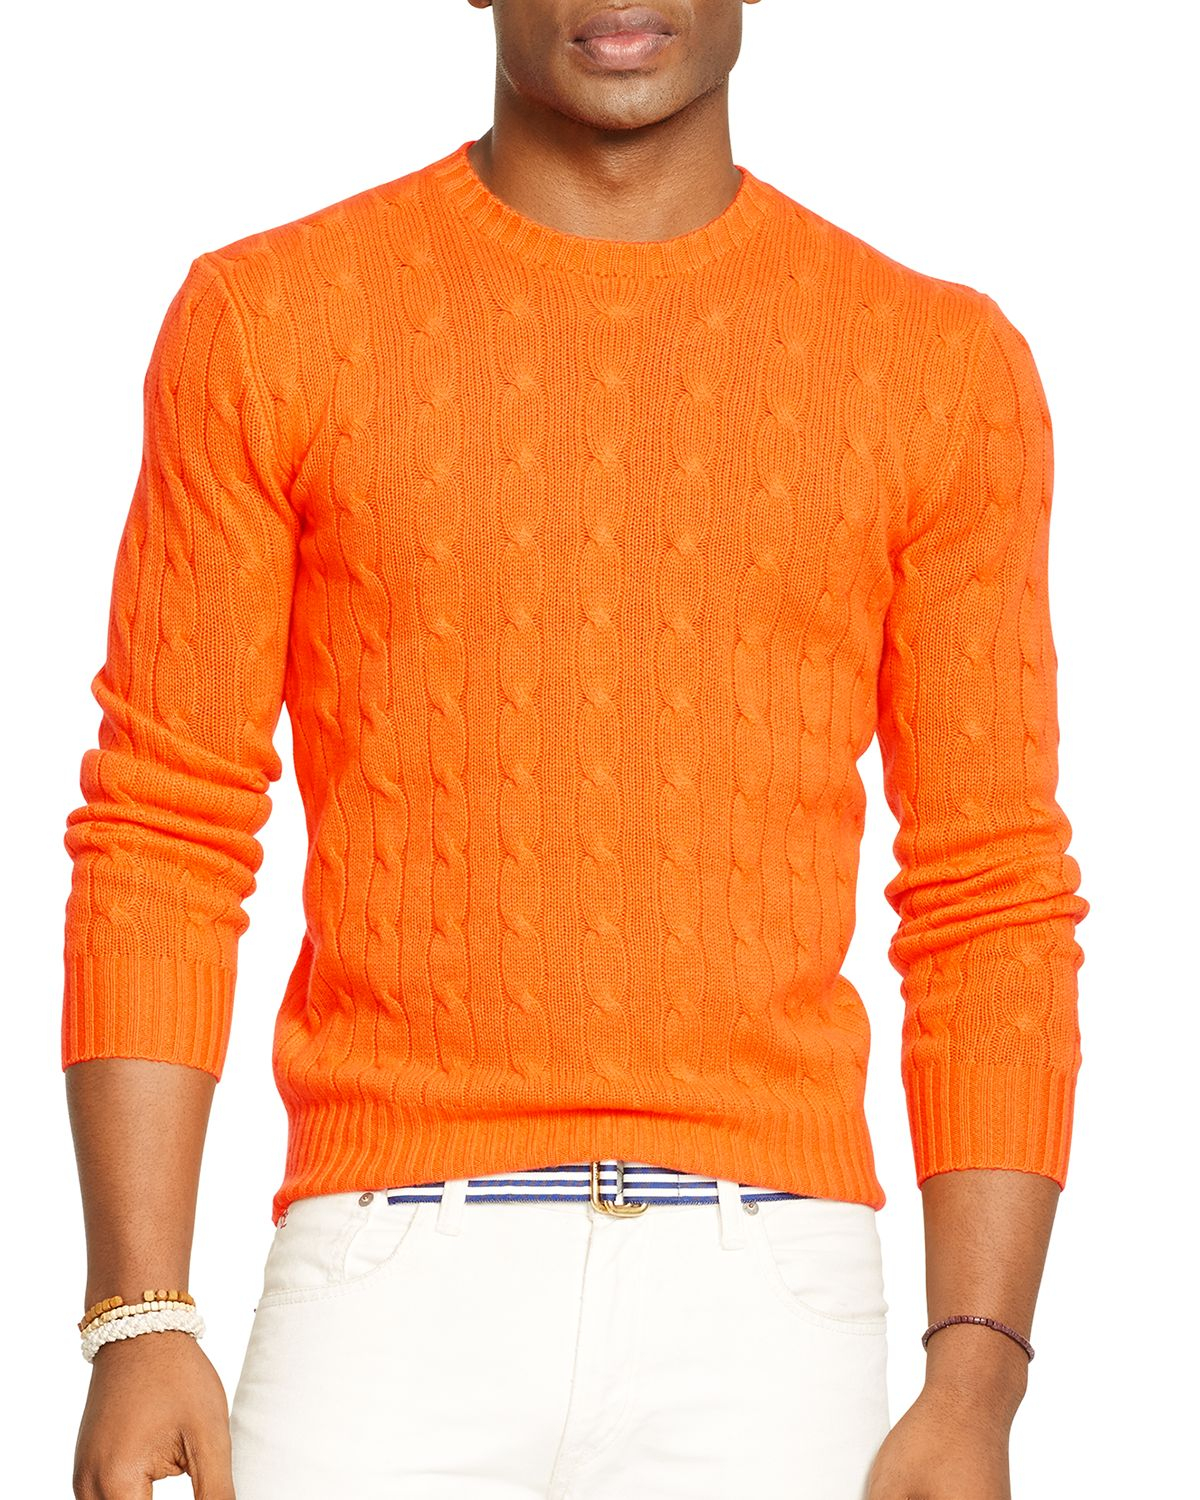 Lyst - Ralph lauren Polo Cable-knit Cashmere Sweater in Orange for Men